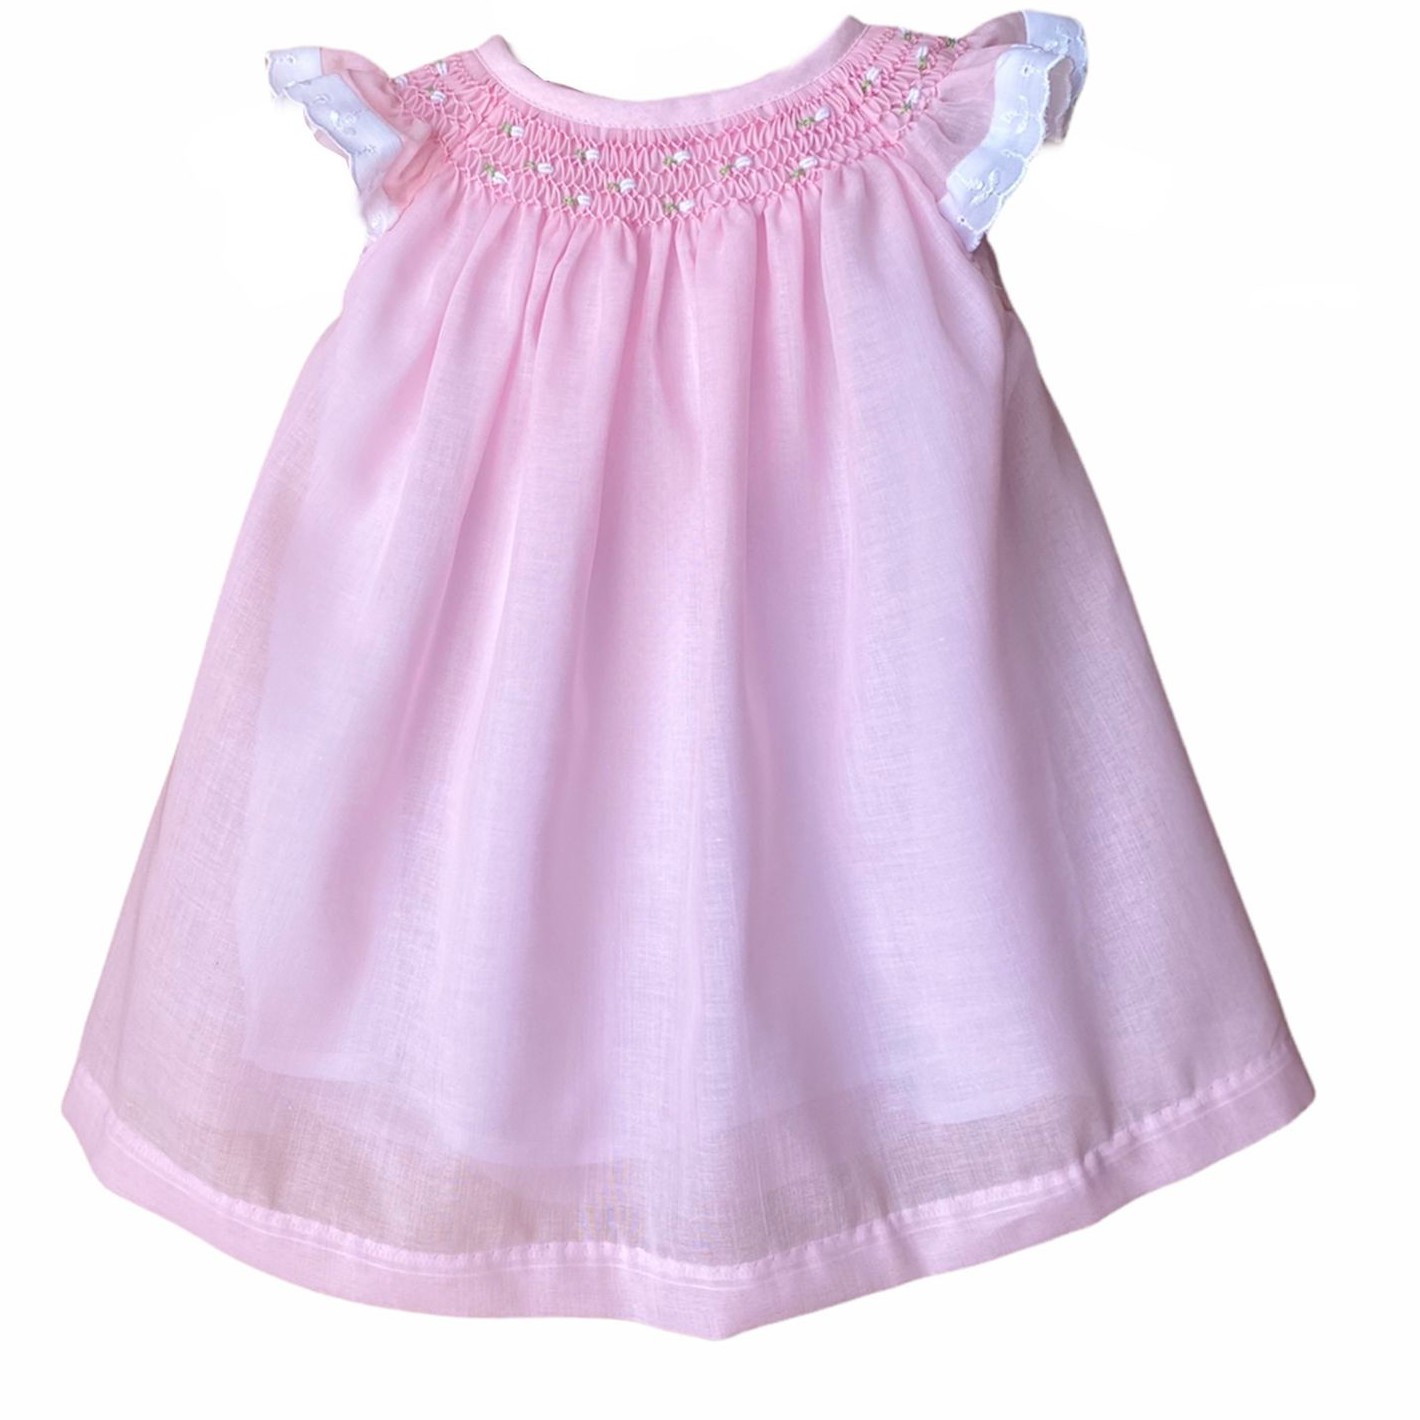 Girl's Dress with Hand Embroidery -  Pink Color with White Embroidery